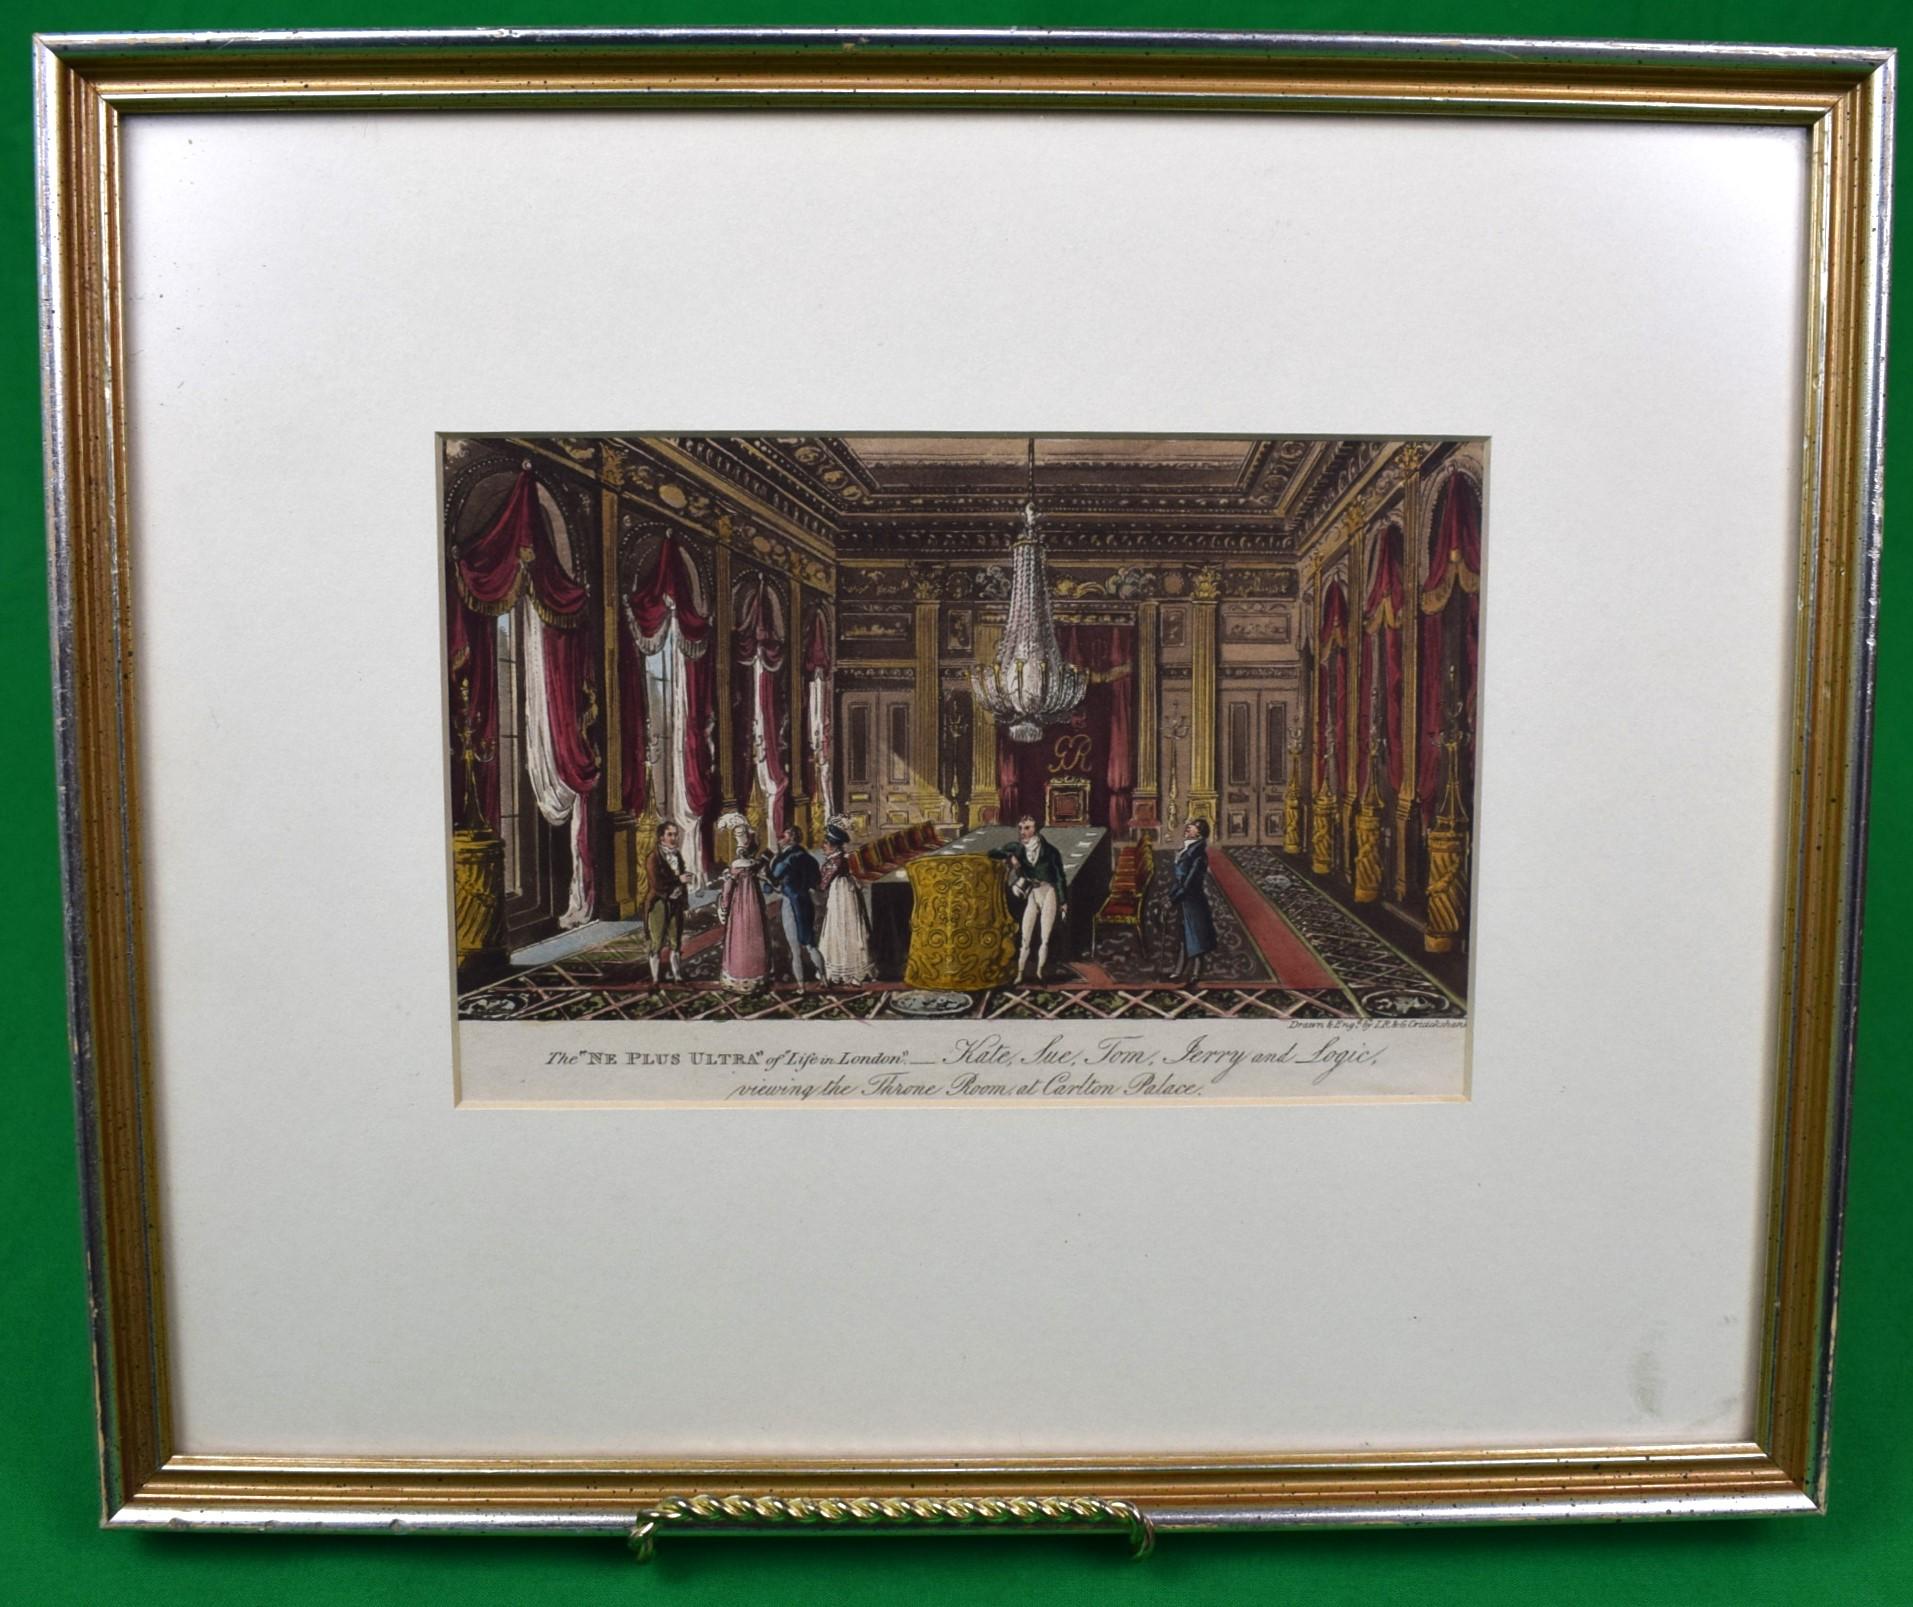 The "Ne Plus Ultra" Of Life In London Viewing The Throne Room At Carlton Palace - Print by I.R. & G. Cruickshank